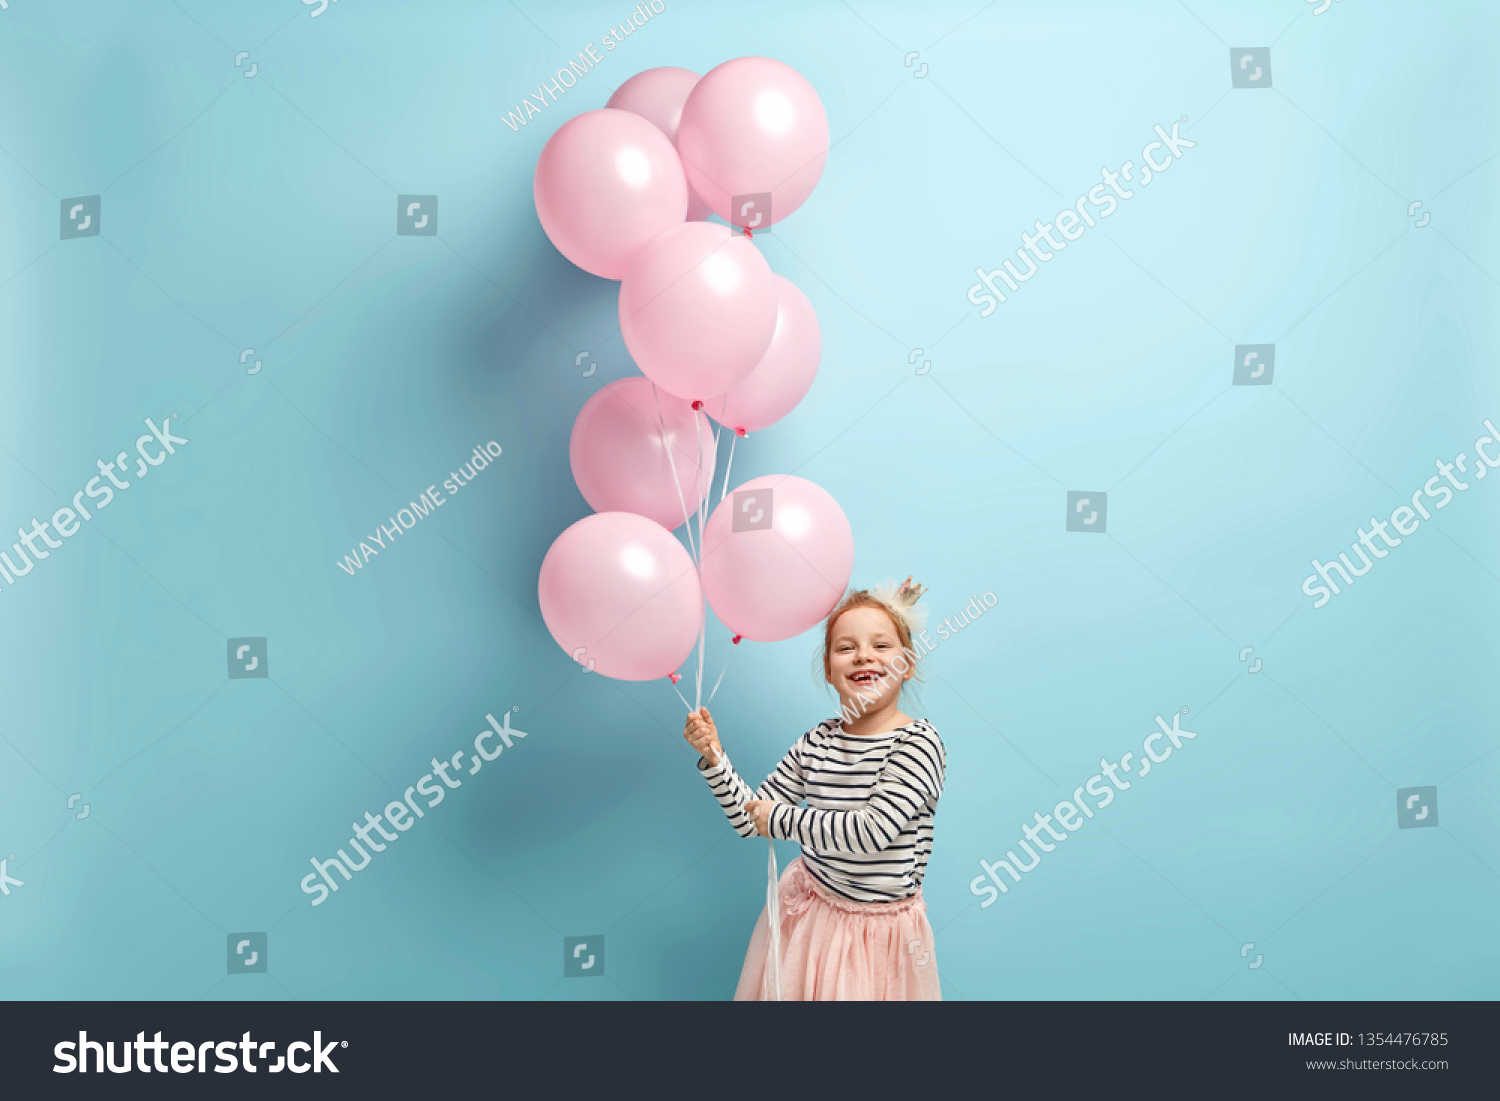 Positive small kid dressed in festive clothes, carries air balloons, celebrates holiday, has broad smile, stands against blue background, being in high spirit. Children and celebration concept #1354476785